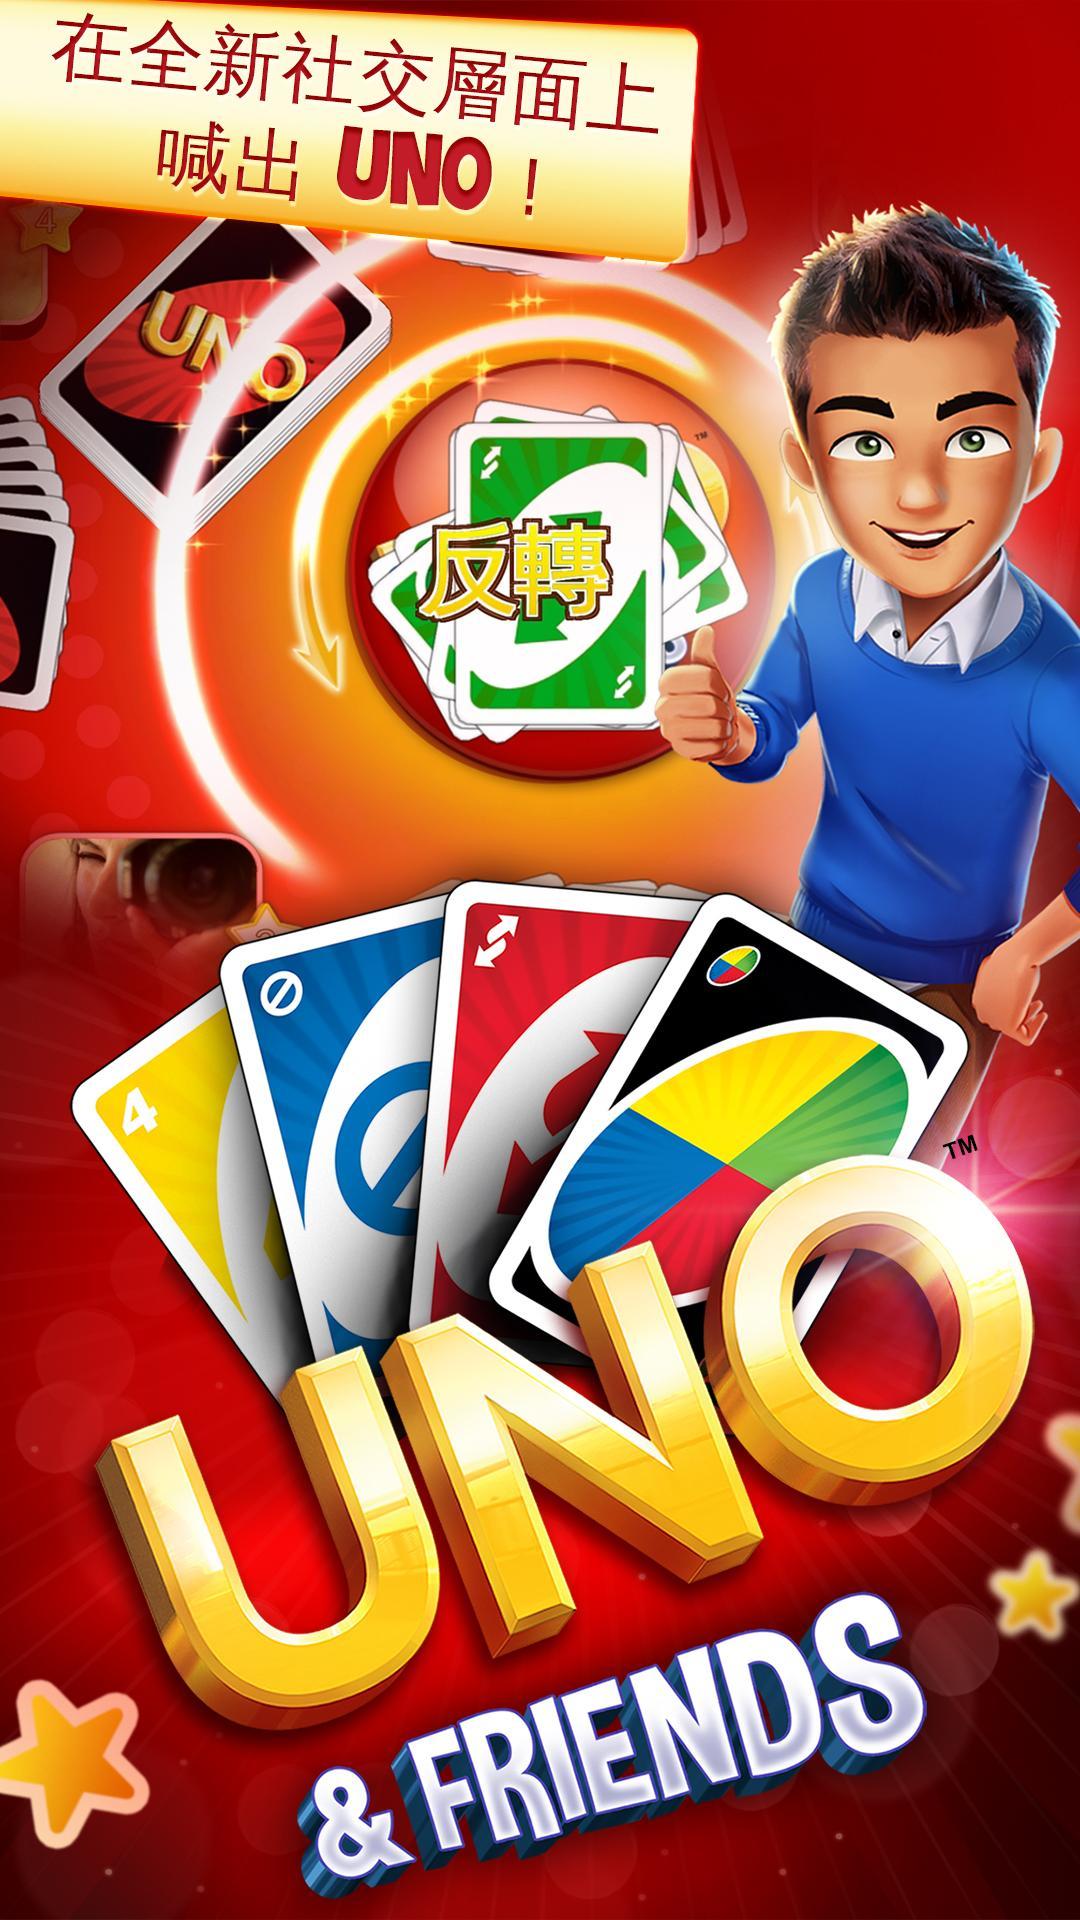 Uno and friends online